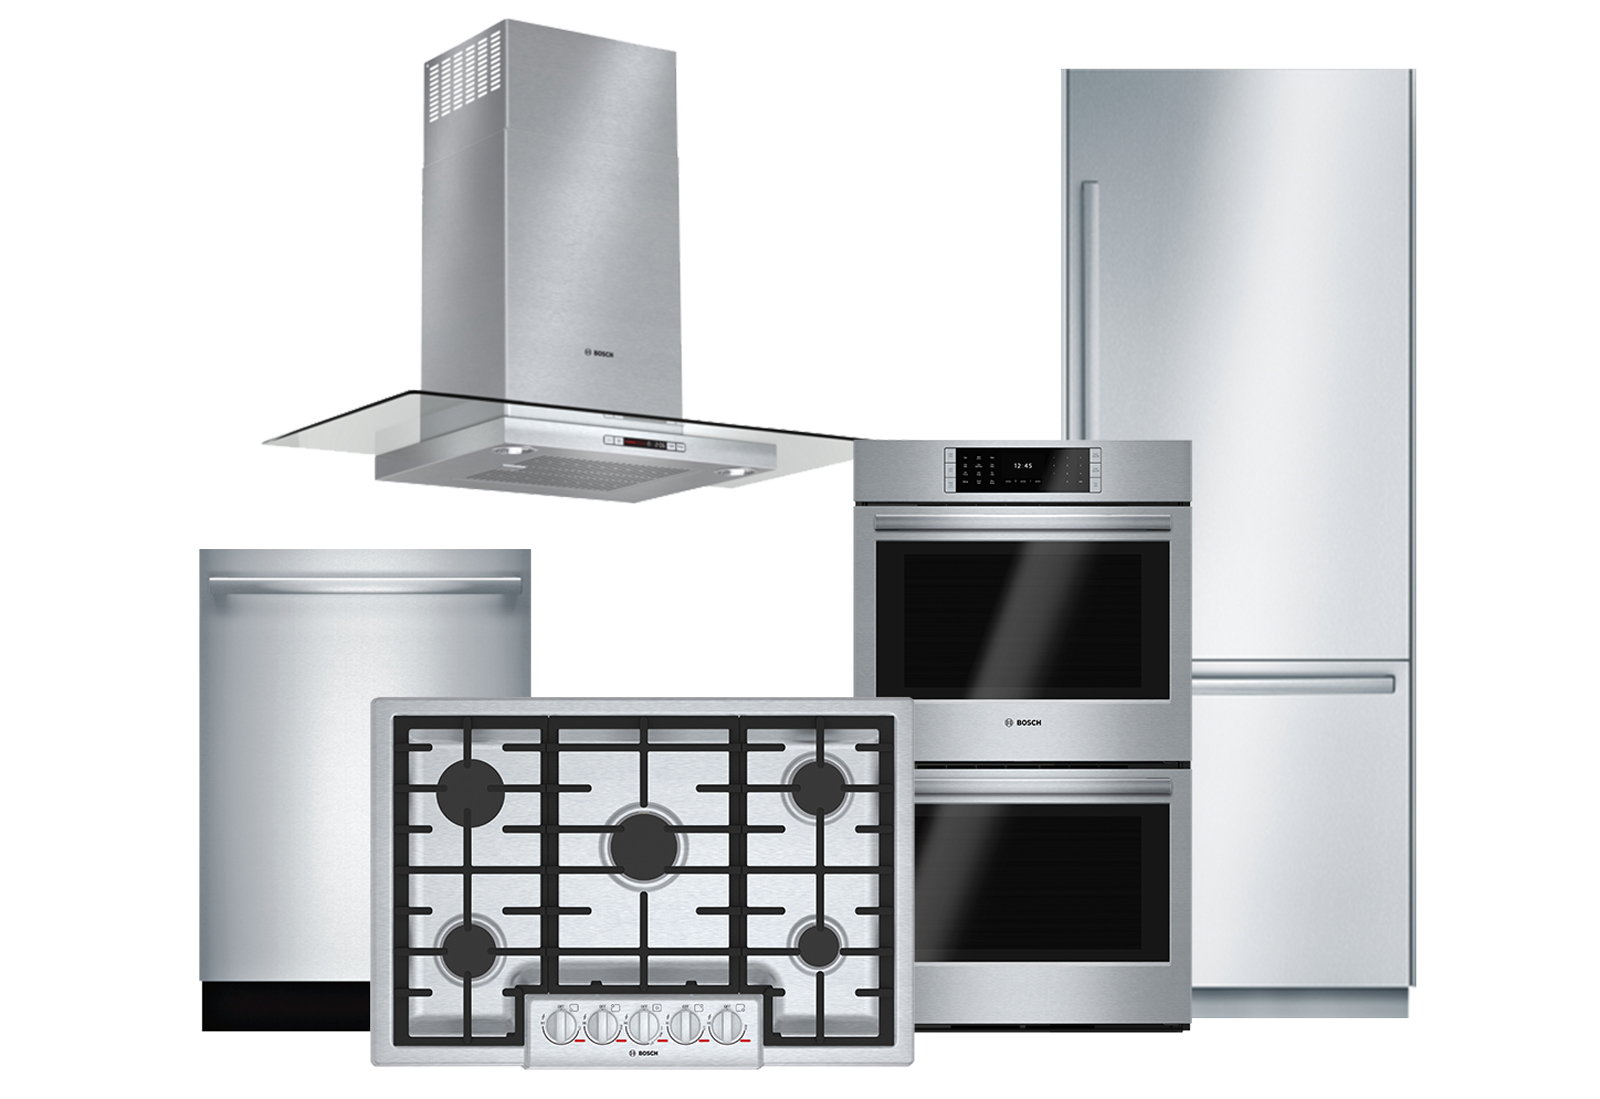 Bosch Borectwodw69 4 Piece Kitchen Appliances Package With French